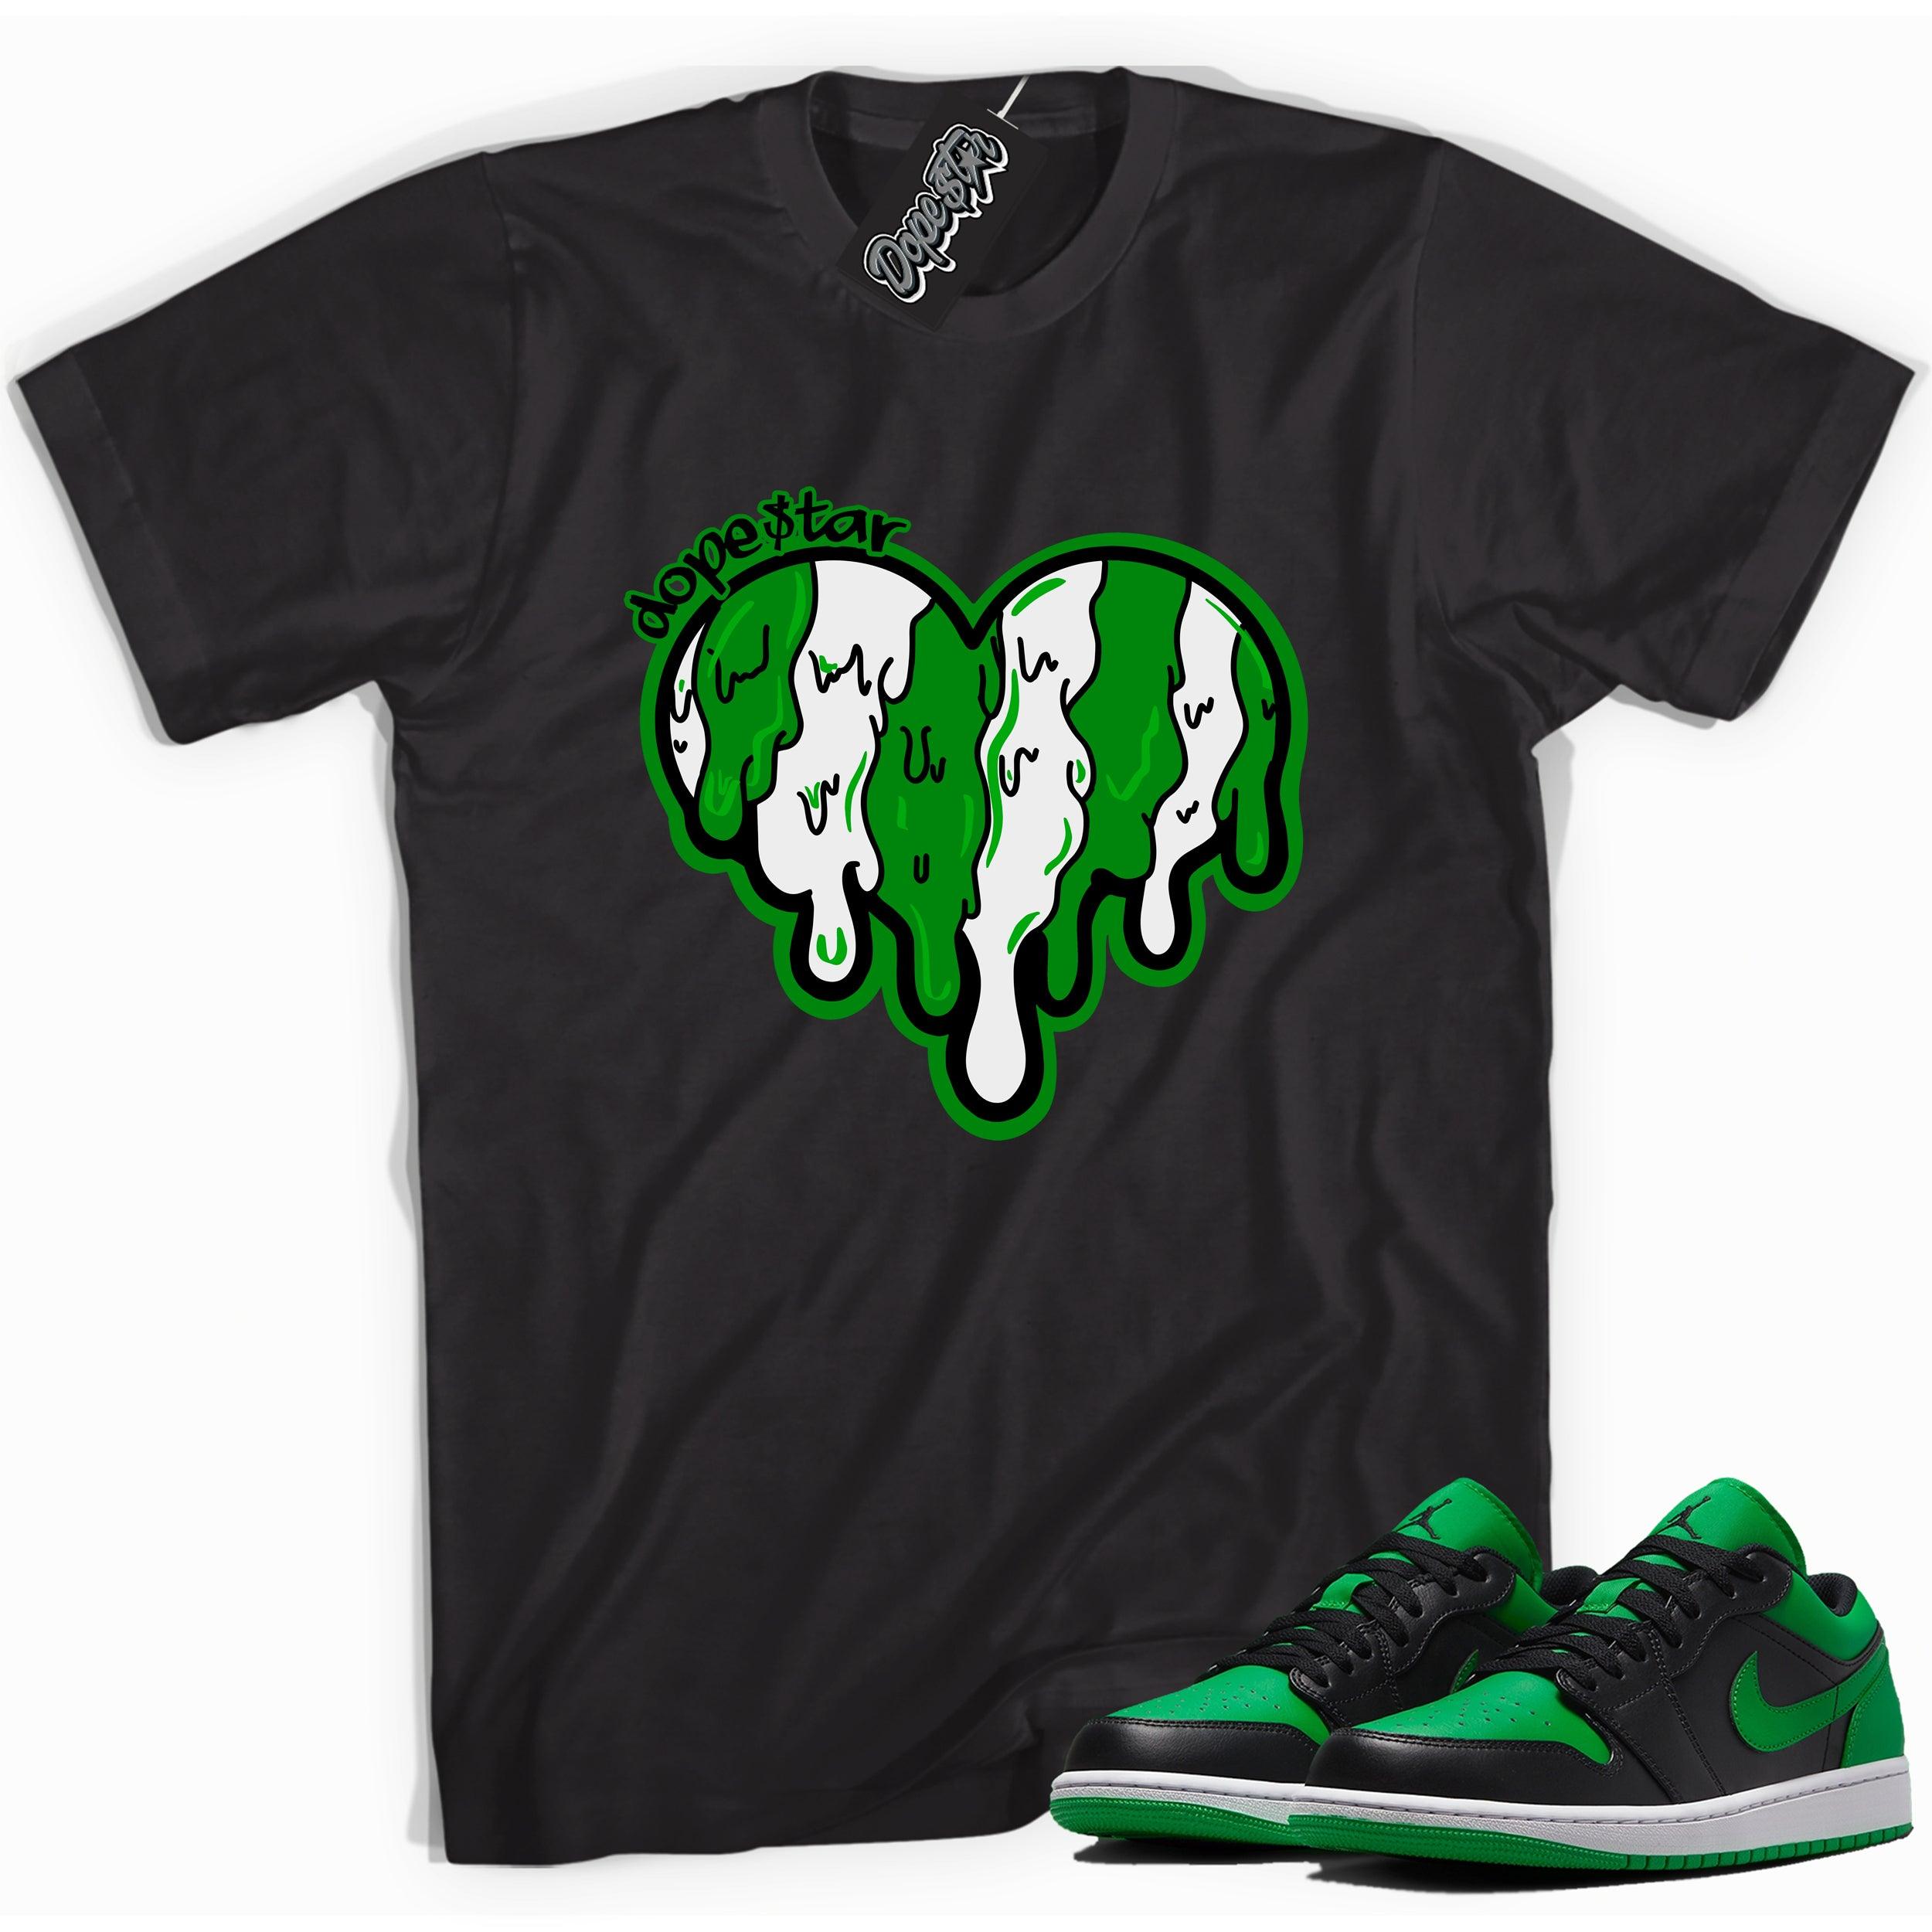 Cool black graphic tee with 'melting heart' print, that perfectly matches Air Jordan 1 Low Lucky Green sneakers